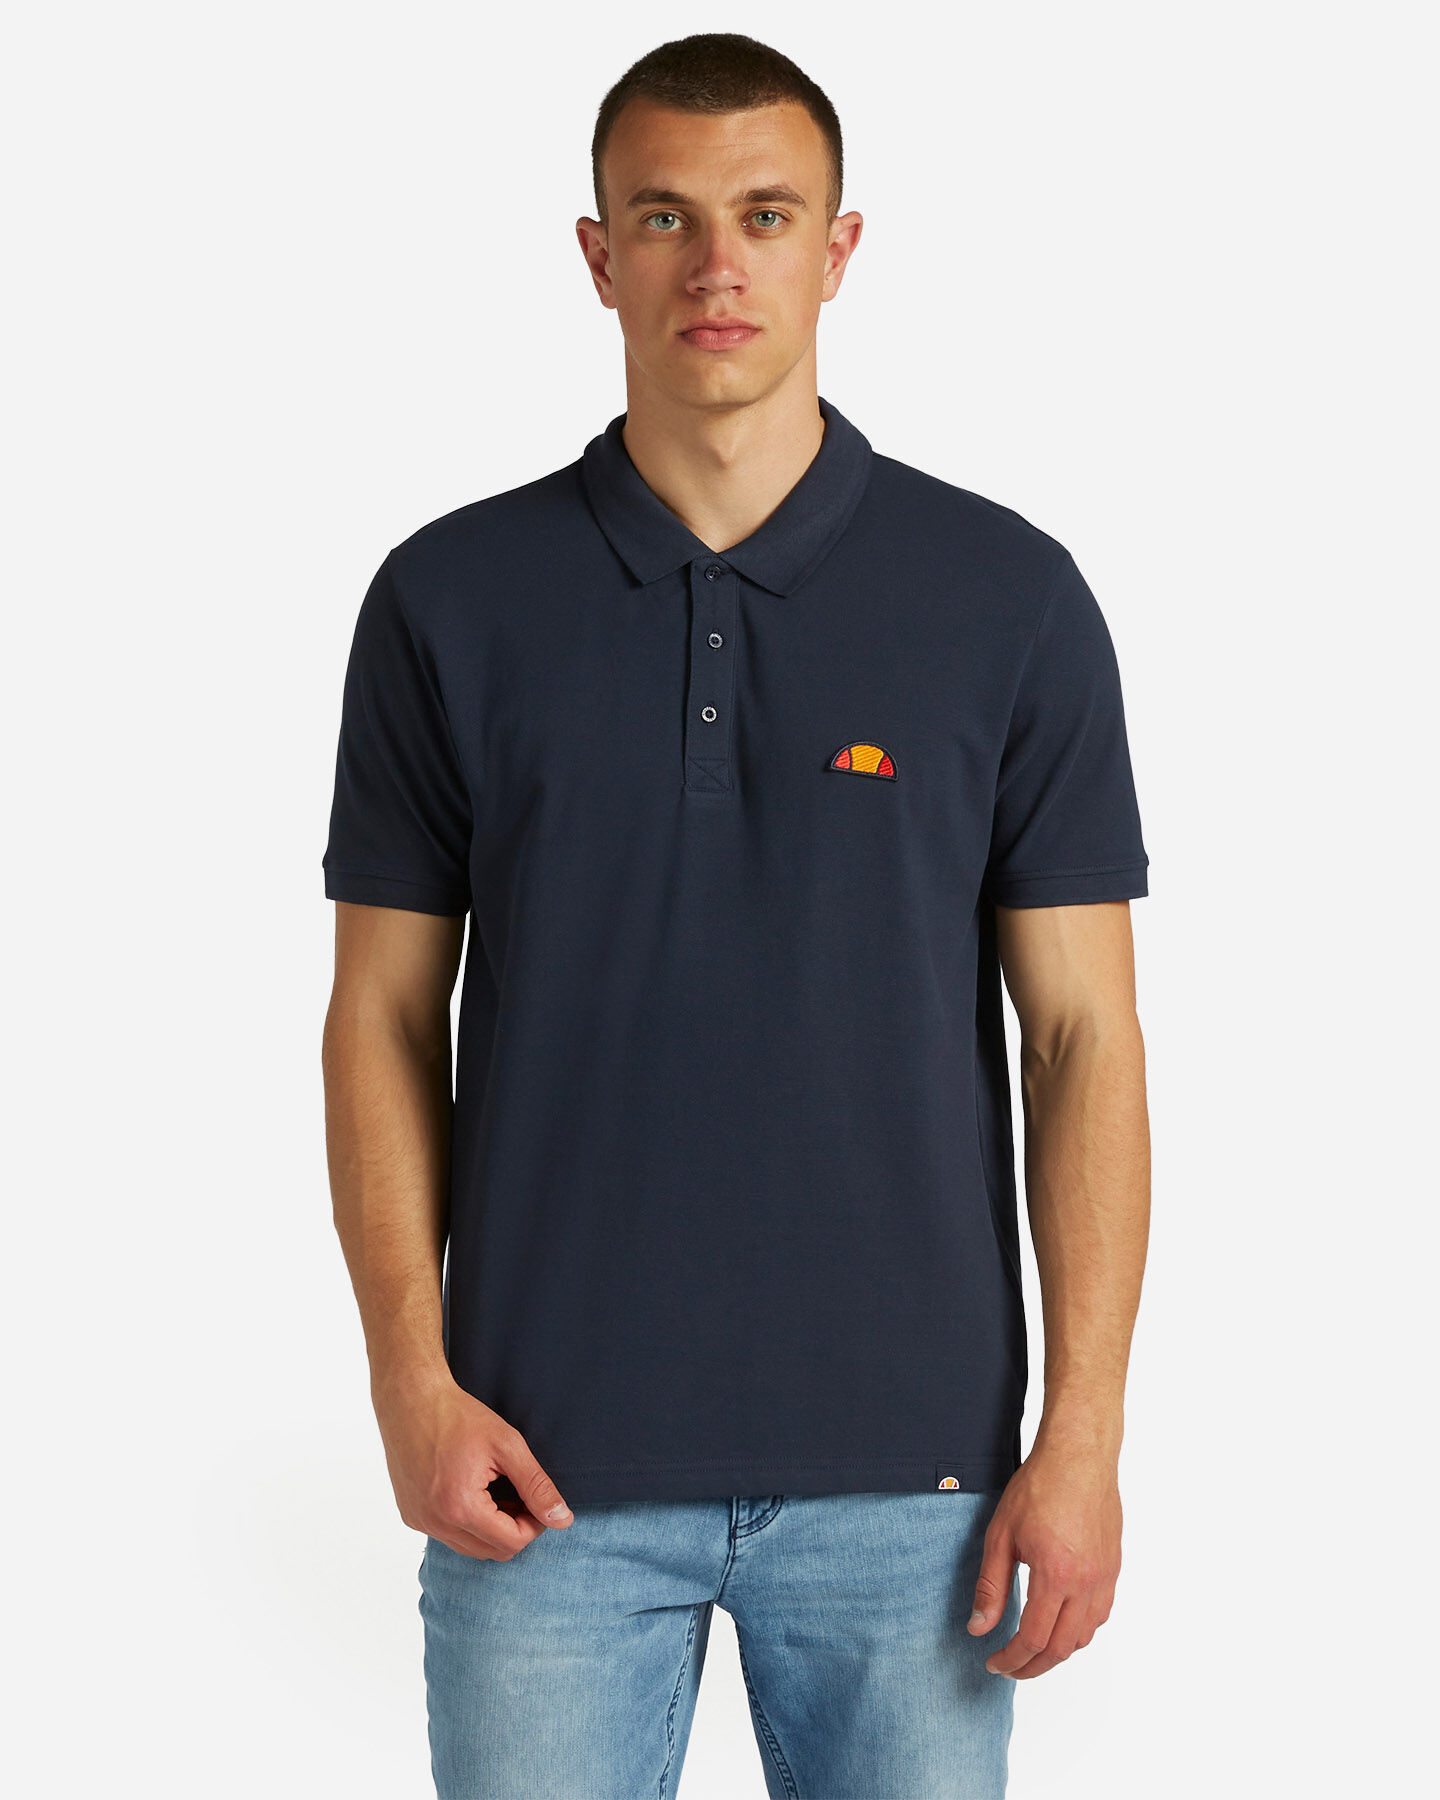  Polo ELLESSE CLASSIC PATCH M S4120101|858|S scatto 0